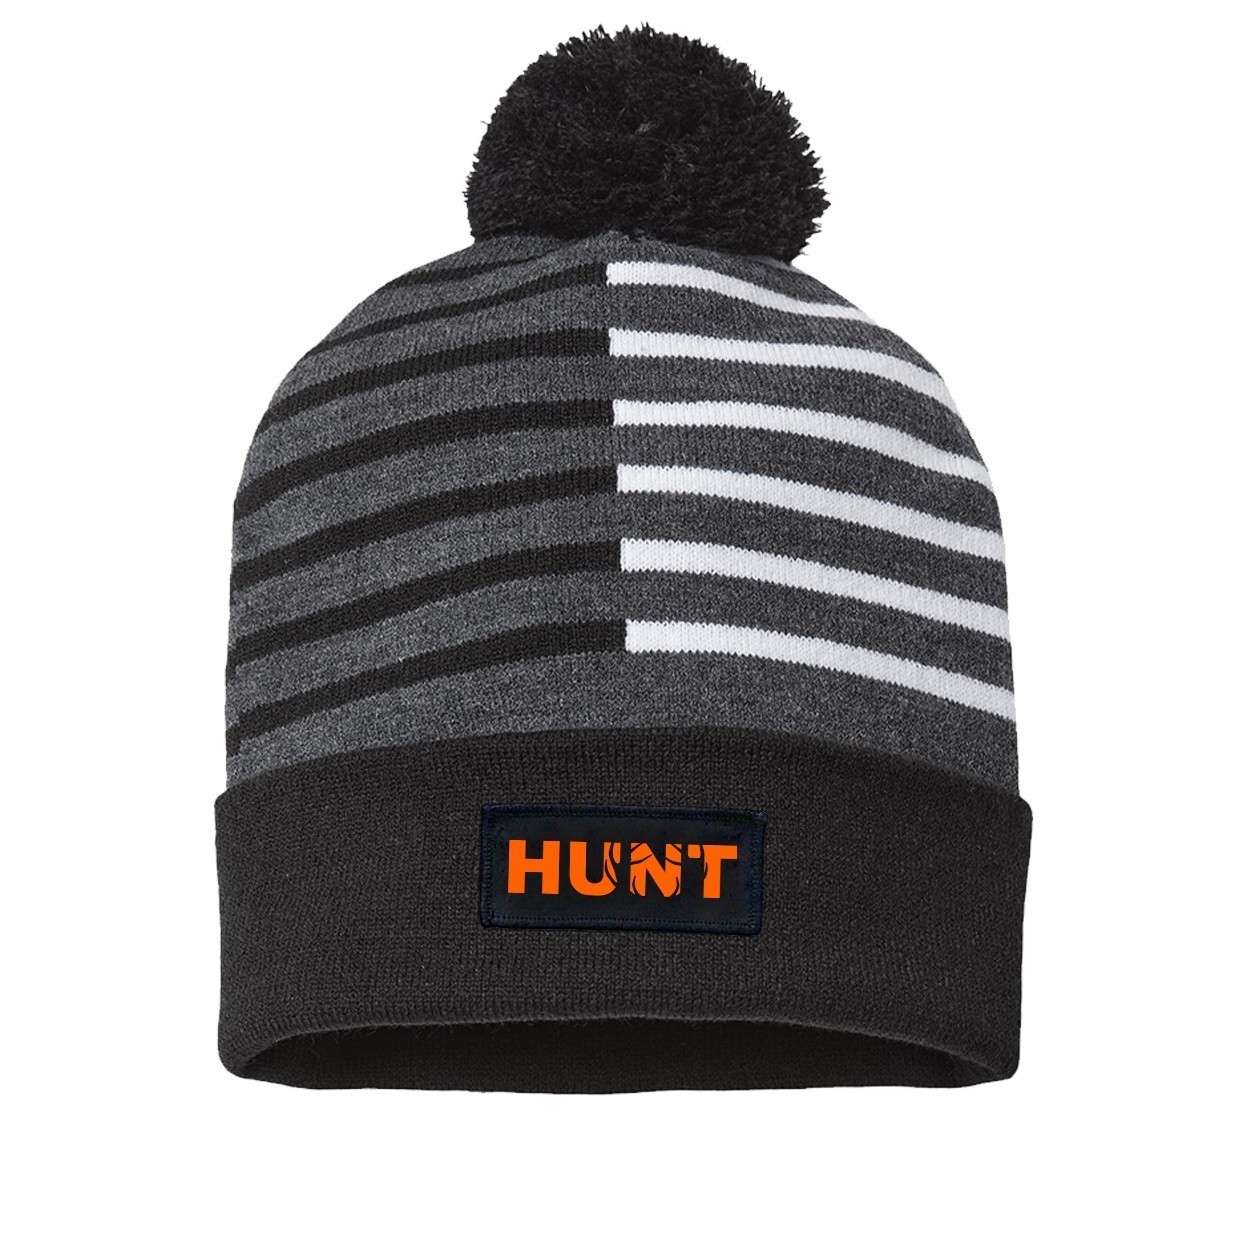 Hunt Rack Logo Night Out Woven Patch Roll Up Pom Knit Beanie Half Color Black/White (Orange Logo)